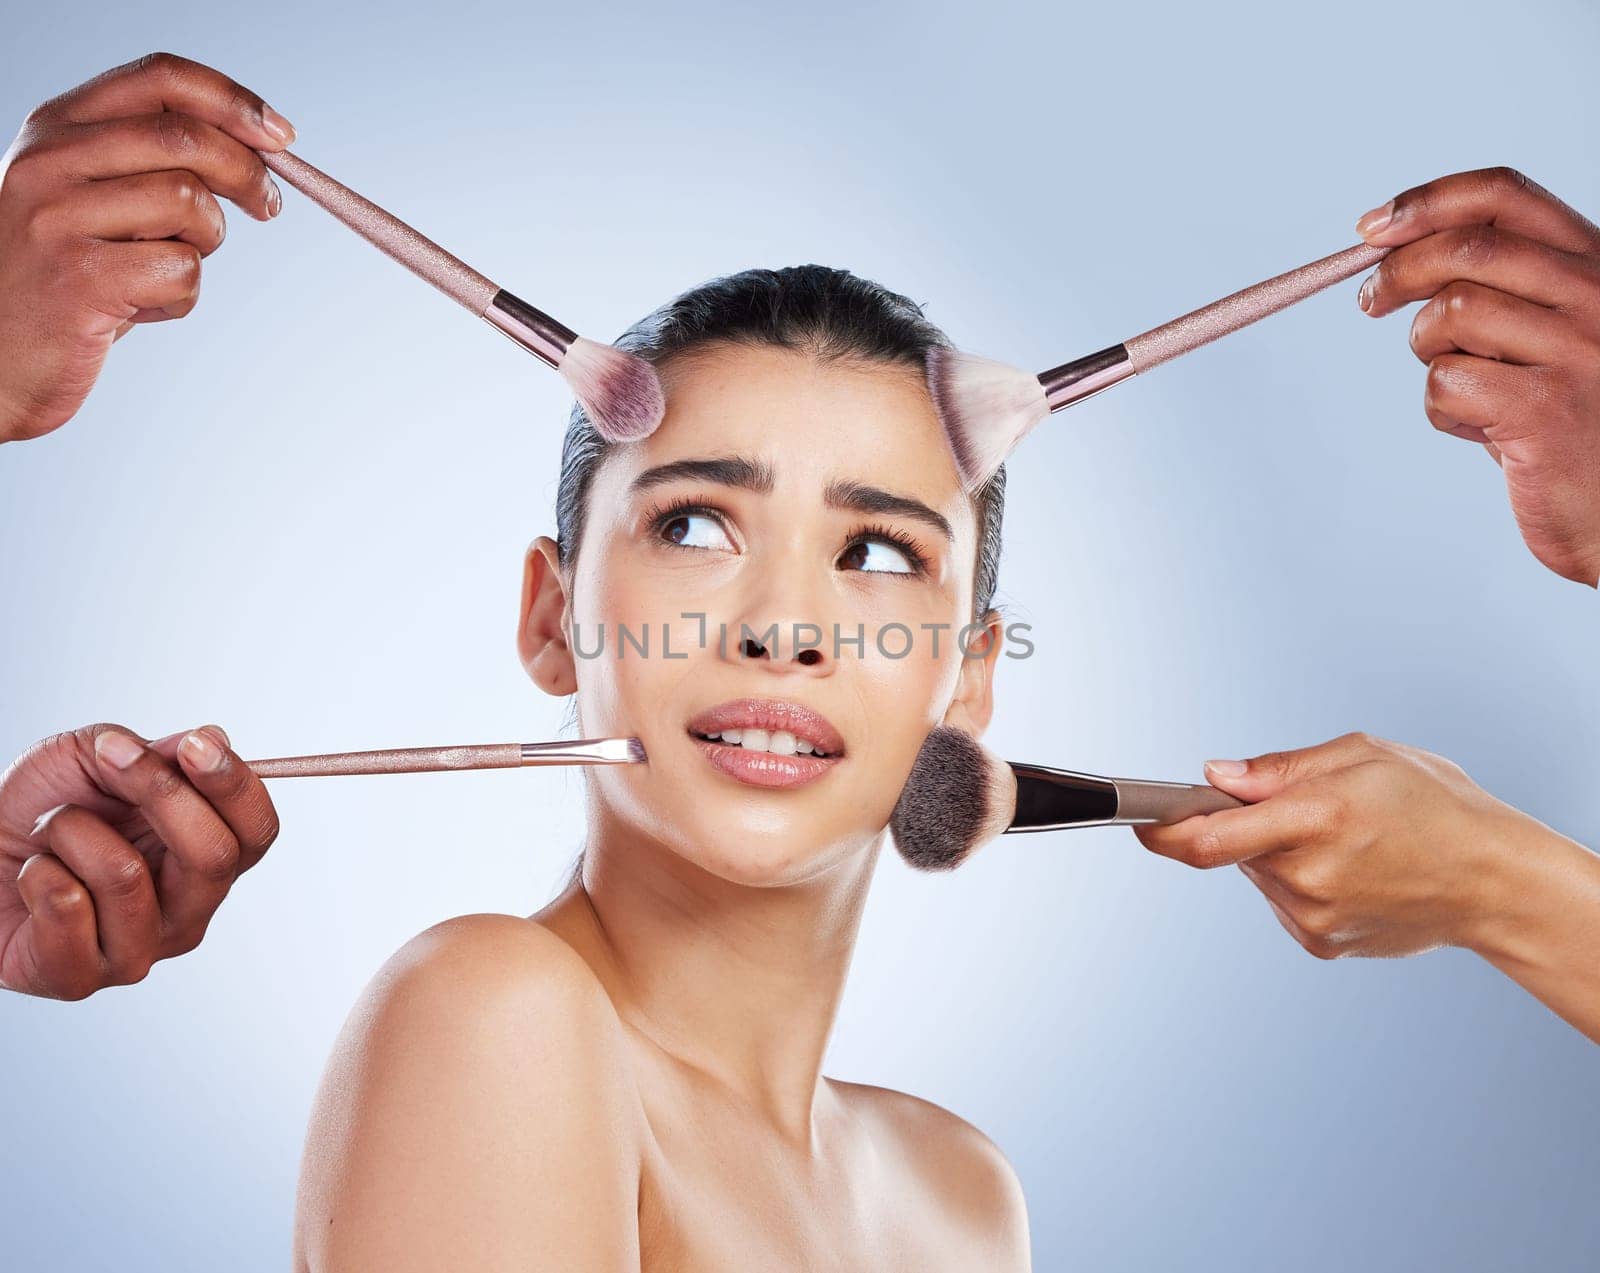 Brush, makeup and confused face of woman in studio for wellness, beauty and cosmetics on blue background. Cosmetology, skincare and girl with brushes for cosmetic application, foundation and products.